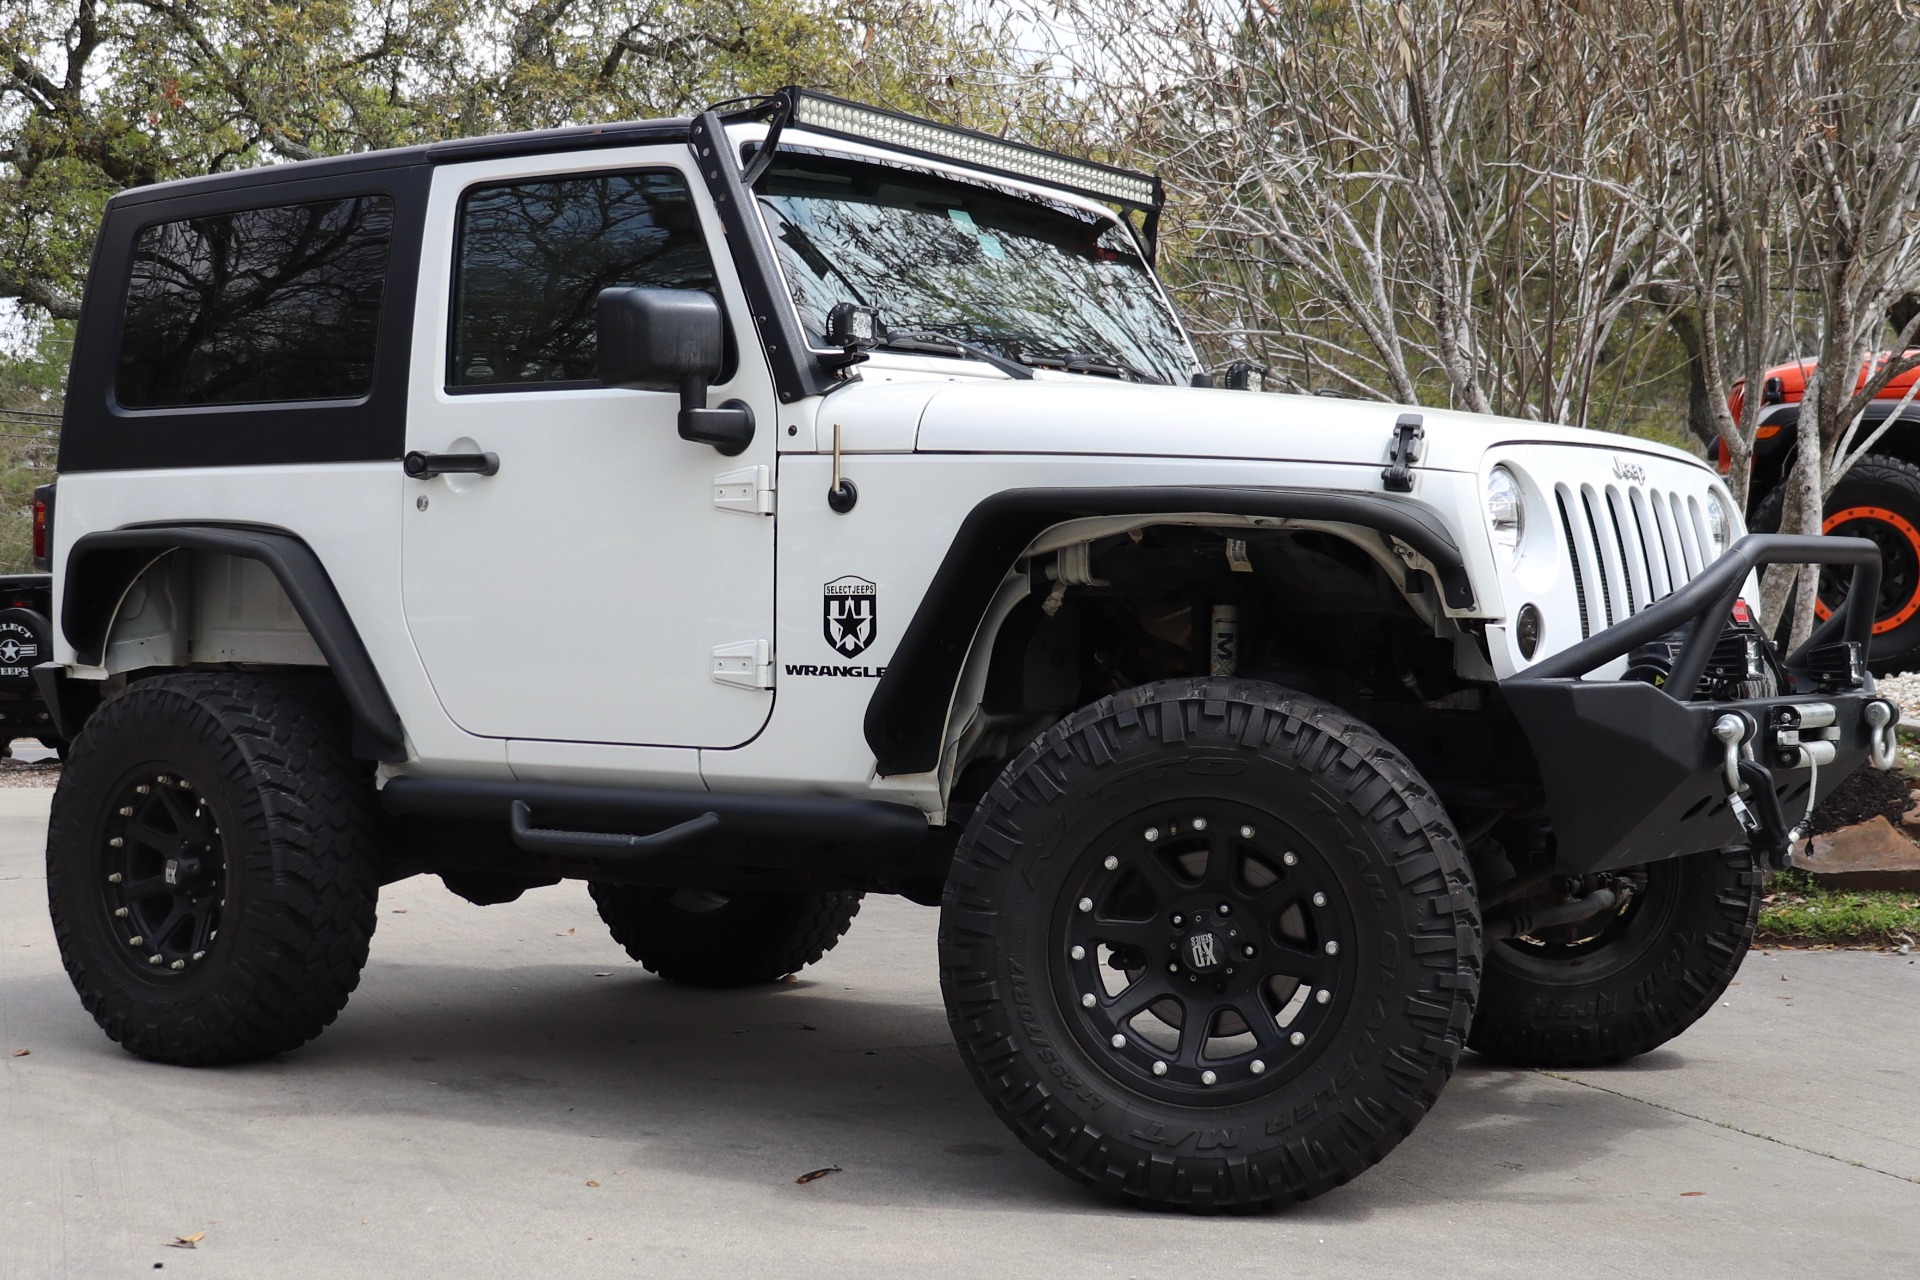 Used 2008 Jeep Wrangler X For Sale ($21,995) | Select Jeeps Inc. Stock  #543354